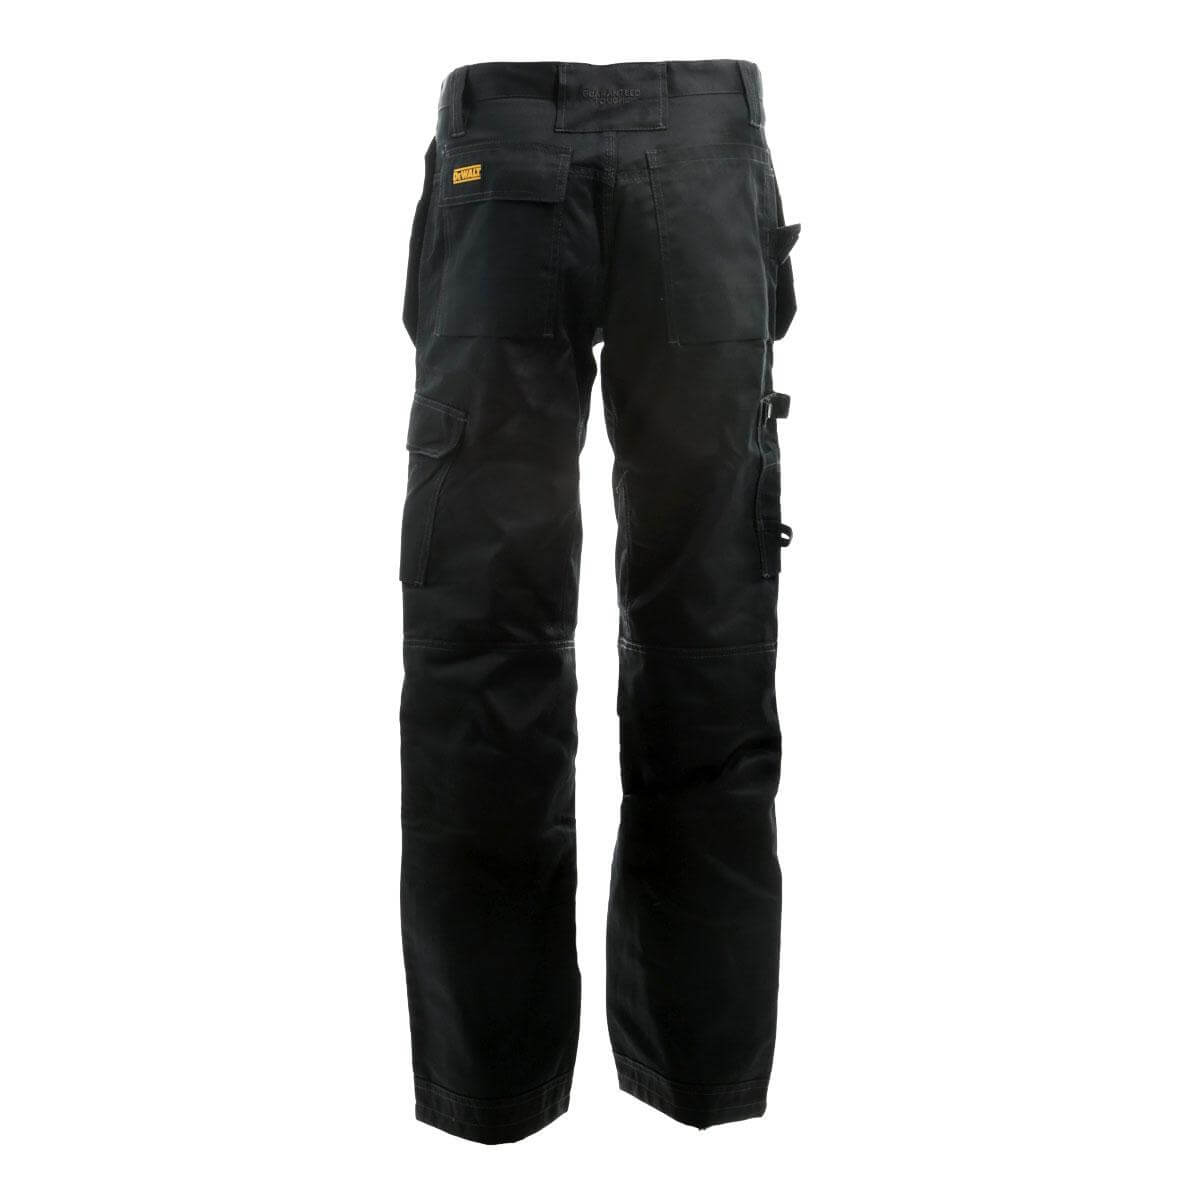 Work Trousers Holster Pockets | Snickers Workwear